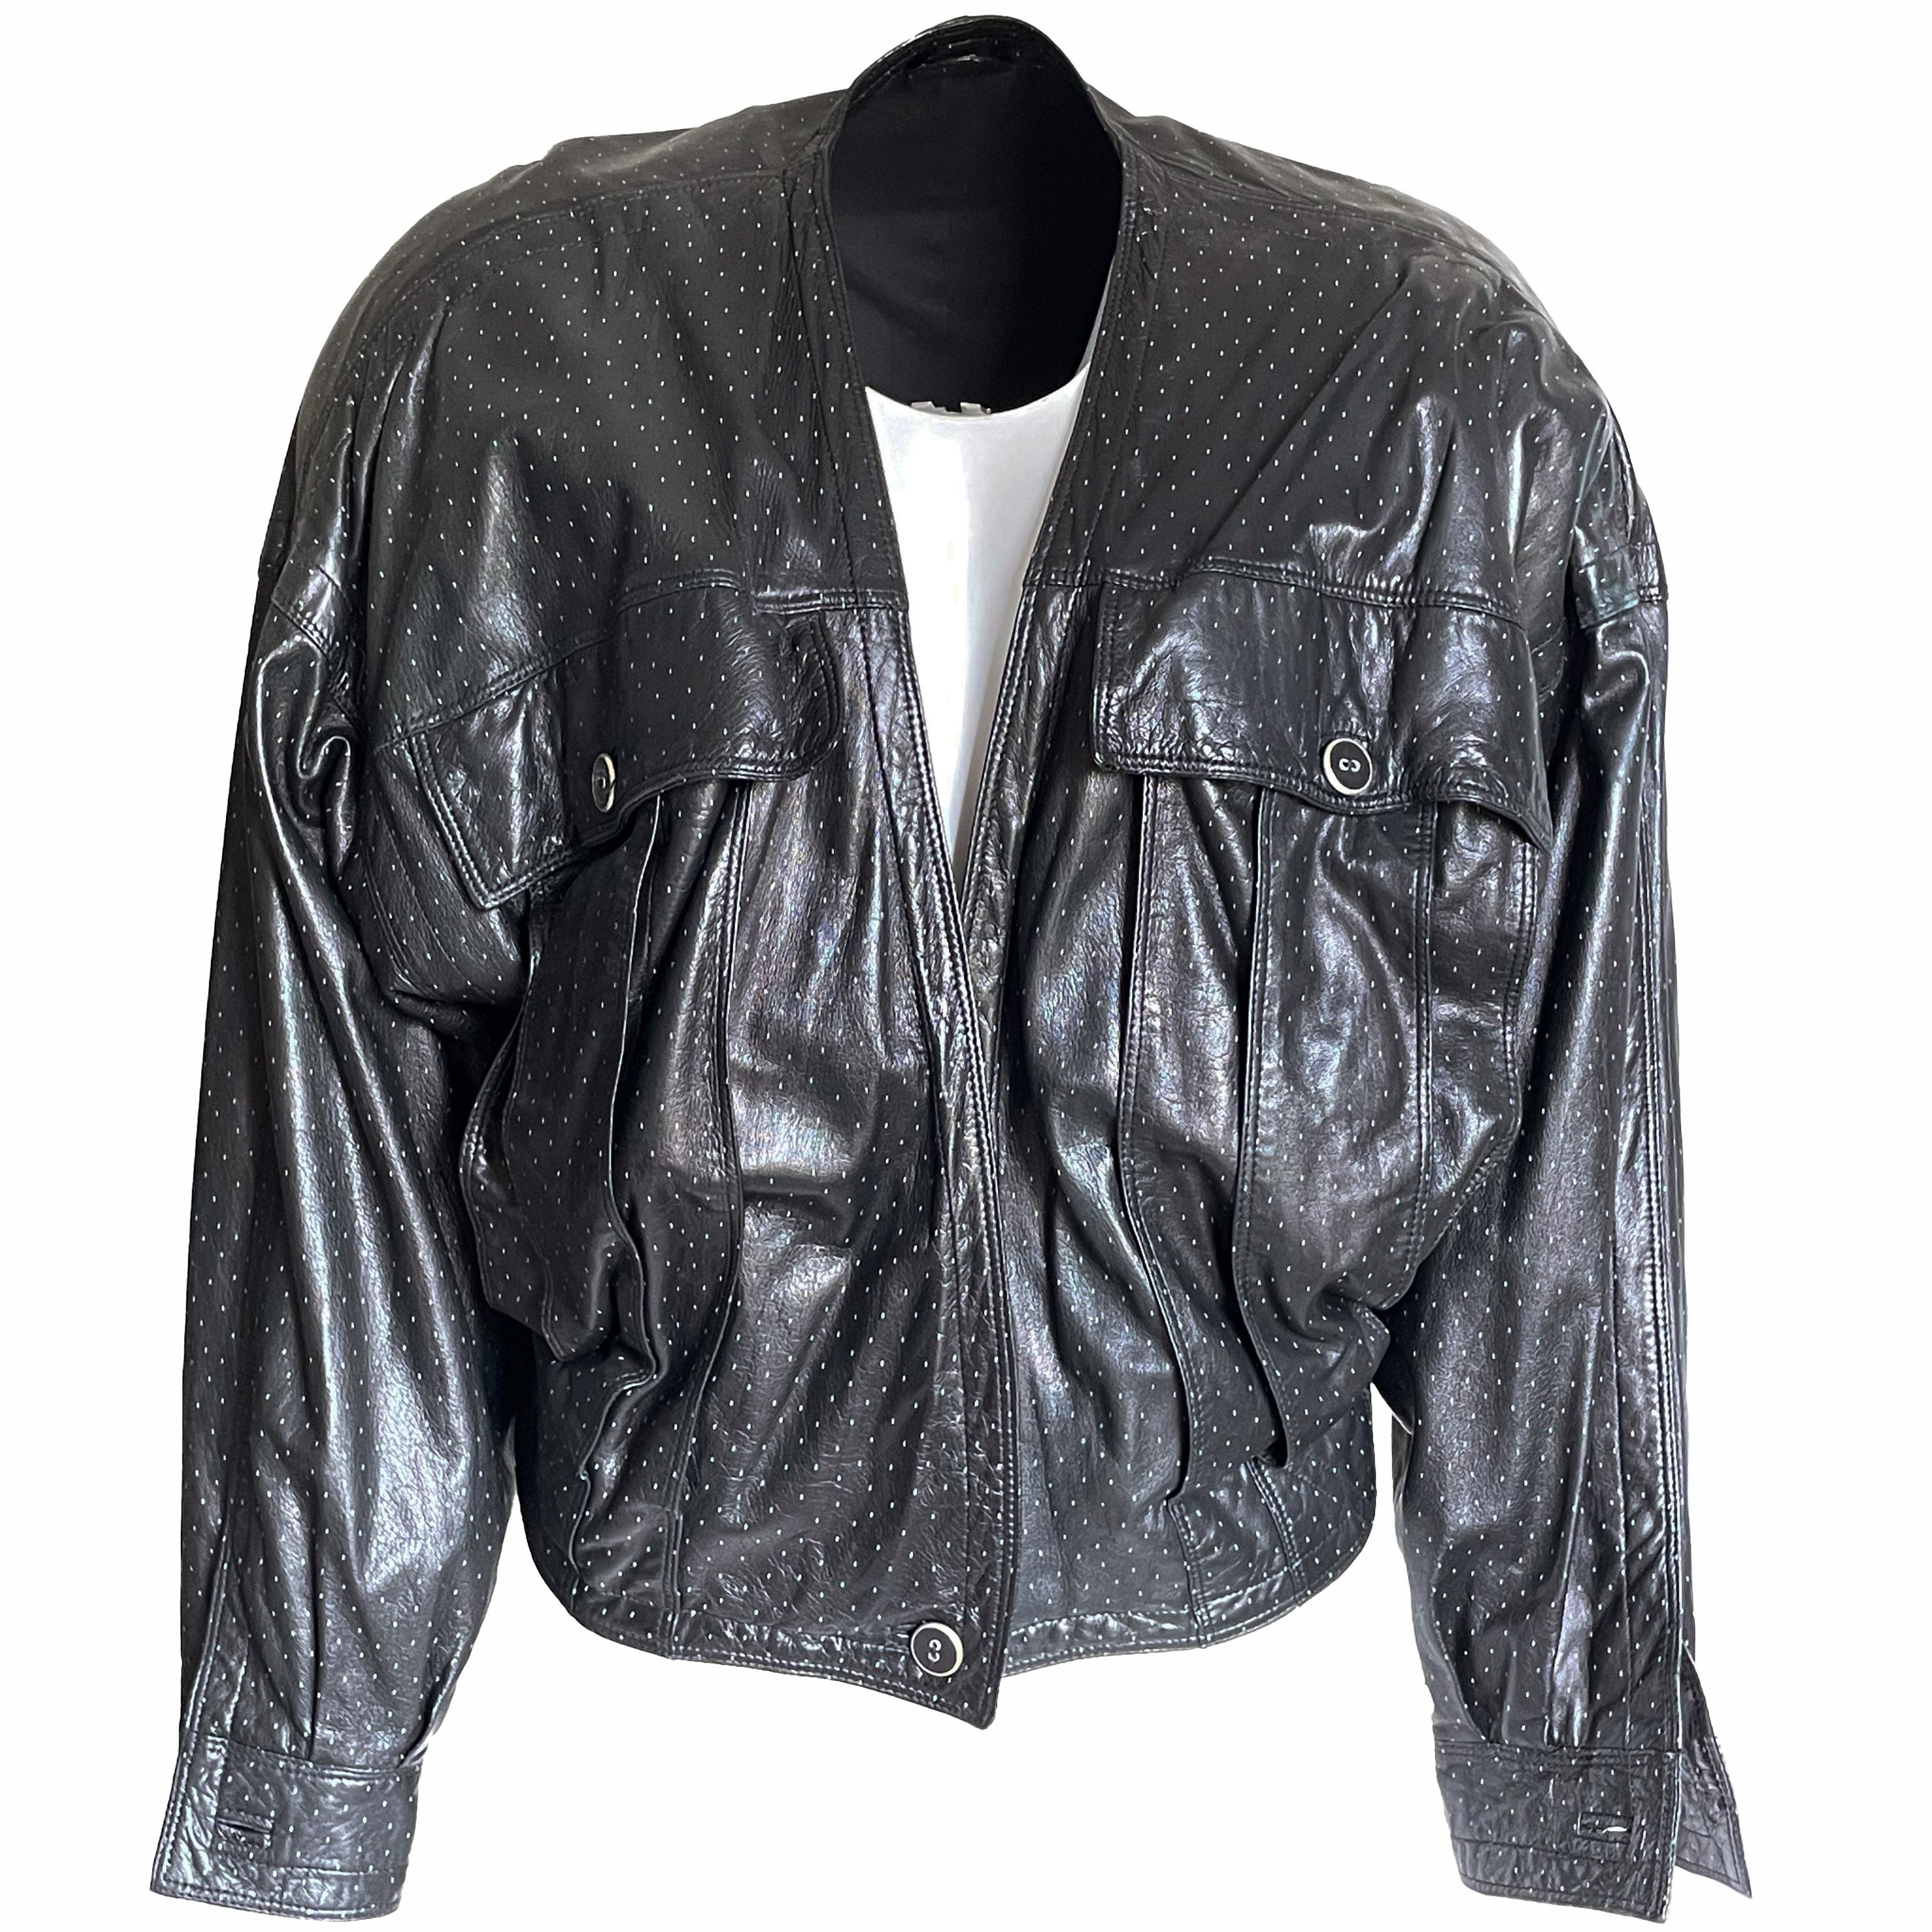 Gianni Versace Leather Bomber Jacket Black Dotted Lambskin Size M Early 90s  For Sale 3